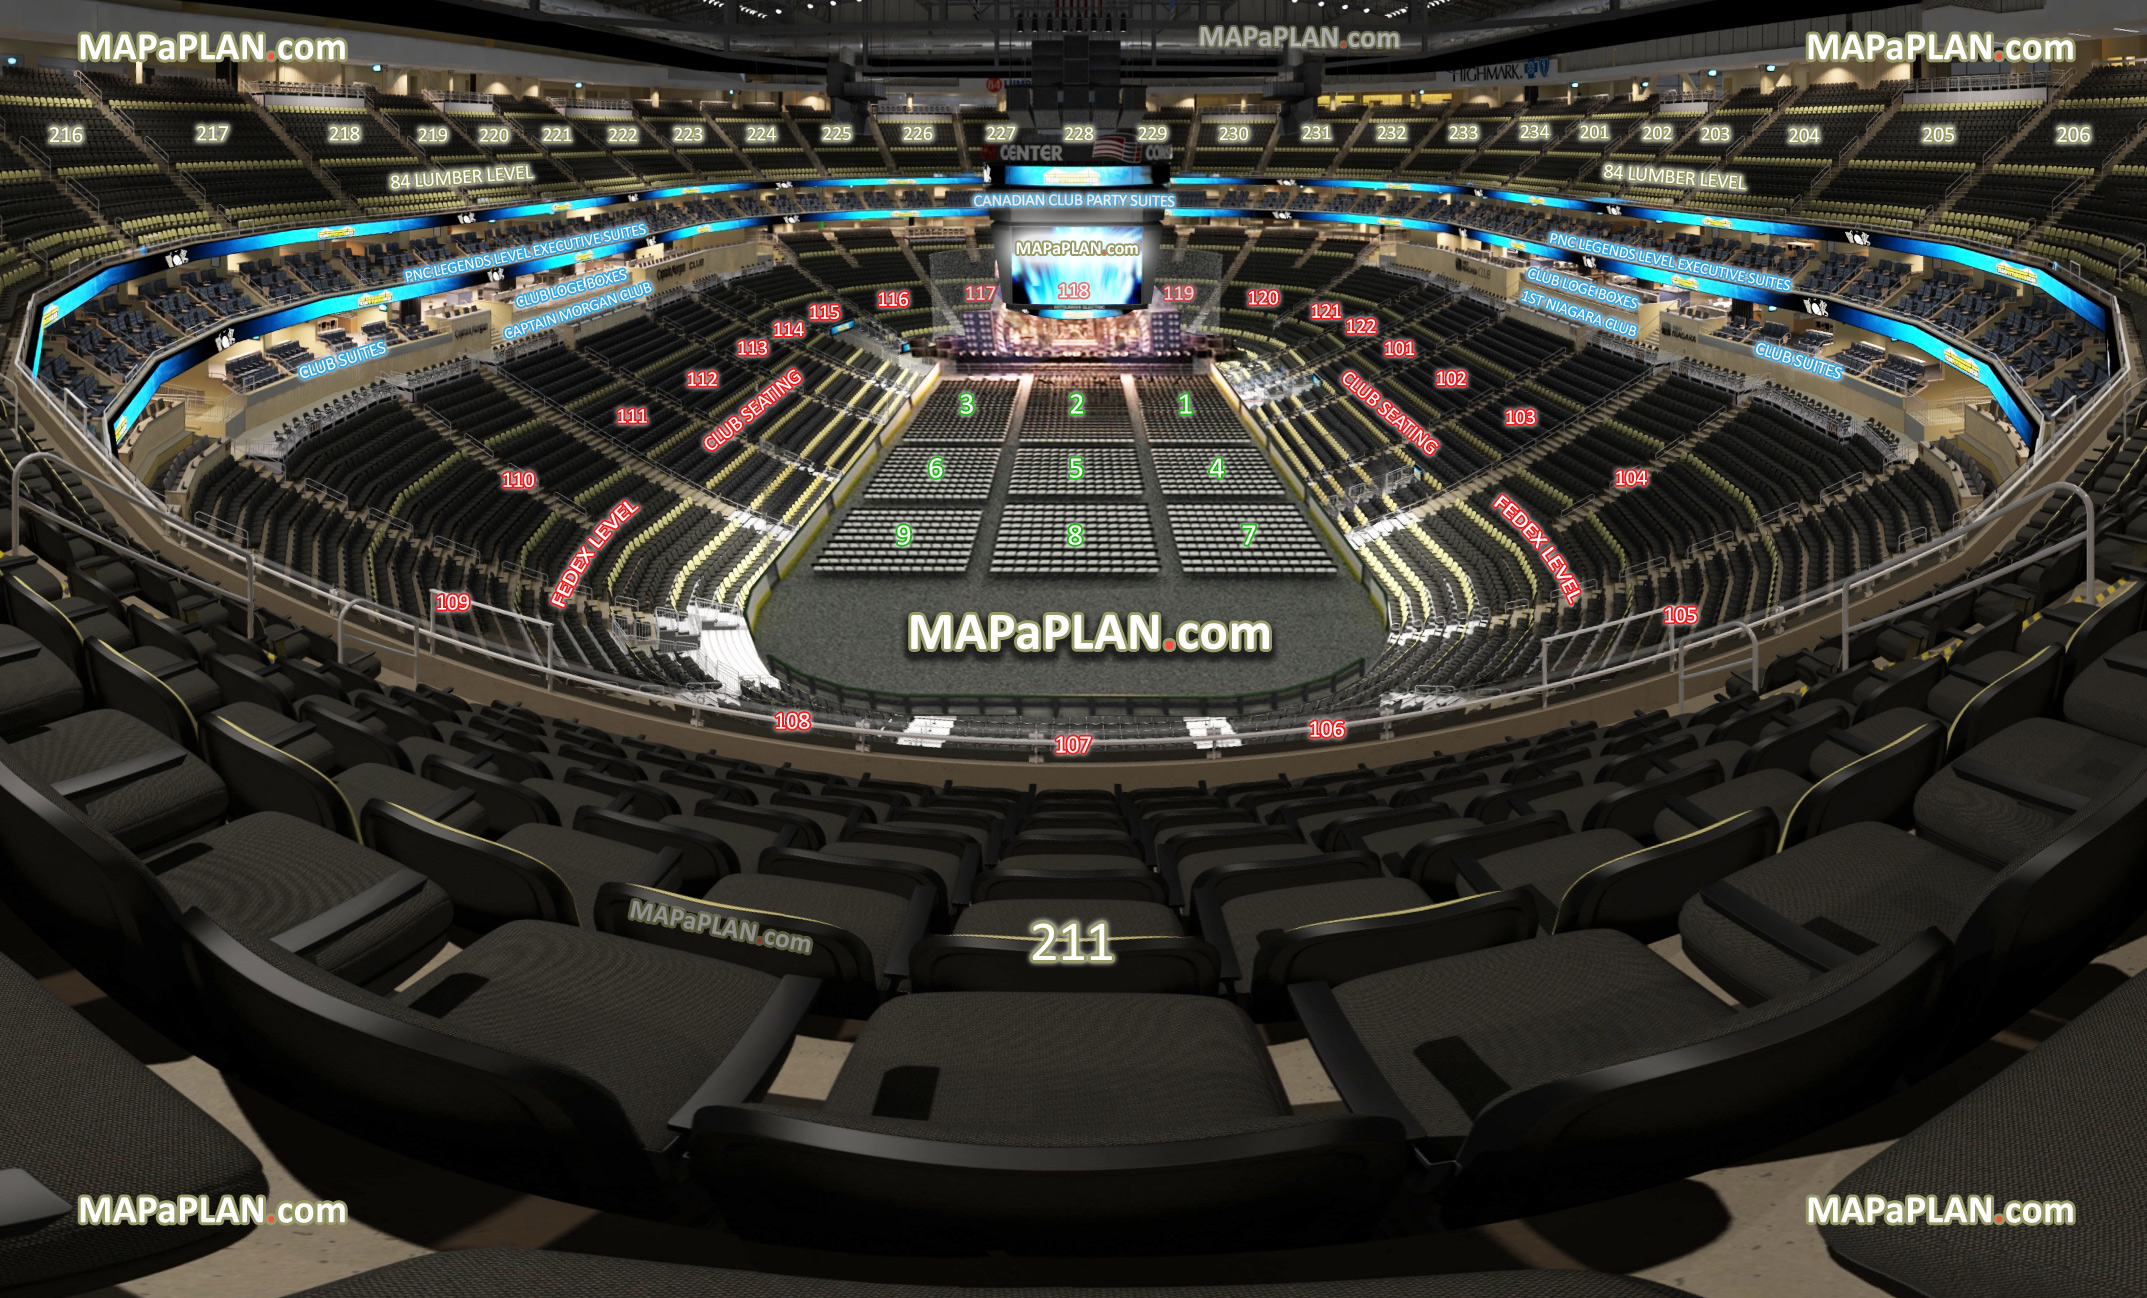 view section 211 row h seat 7 virtual venue 3d interactive interior tour upper level inside picture general admission ga 1st niagara club Pittsburgh PPG Paints Arena seating chart